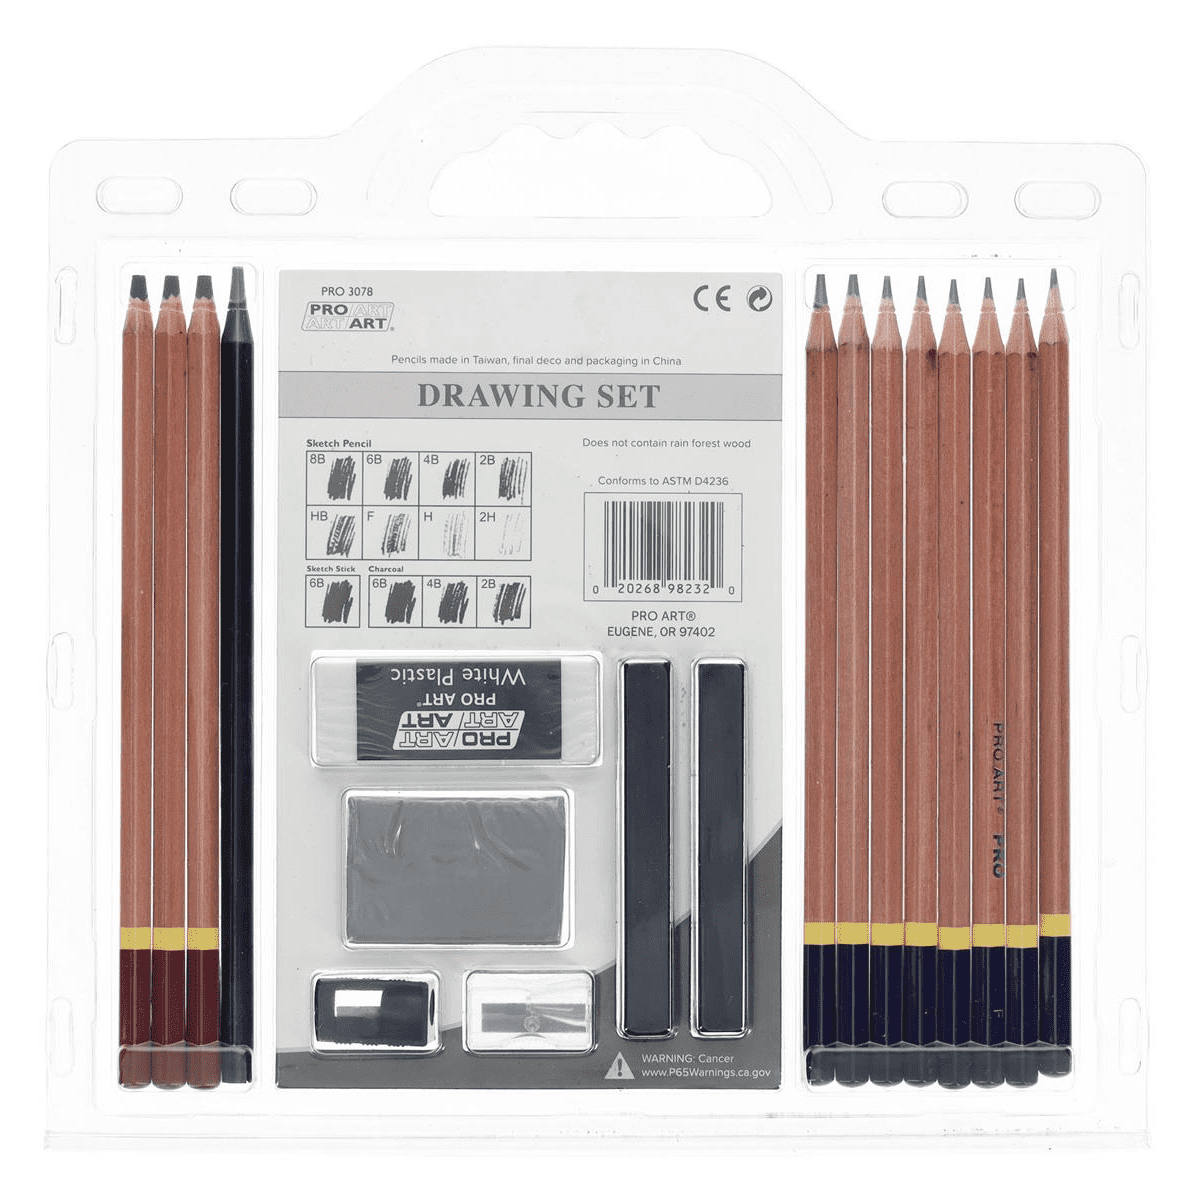 Drawing pencils, Surcotto professional sketching pencils set for beginner,  artist pencils with eraser and sharpener (8B-2H). (14-Count) : Amazon.co.uk:  Stationery & Office Supplies